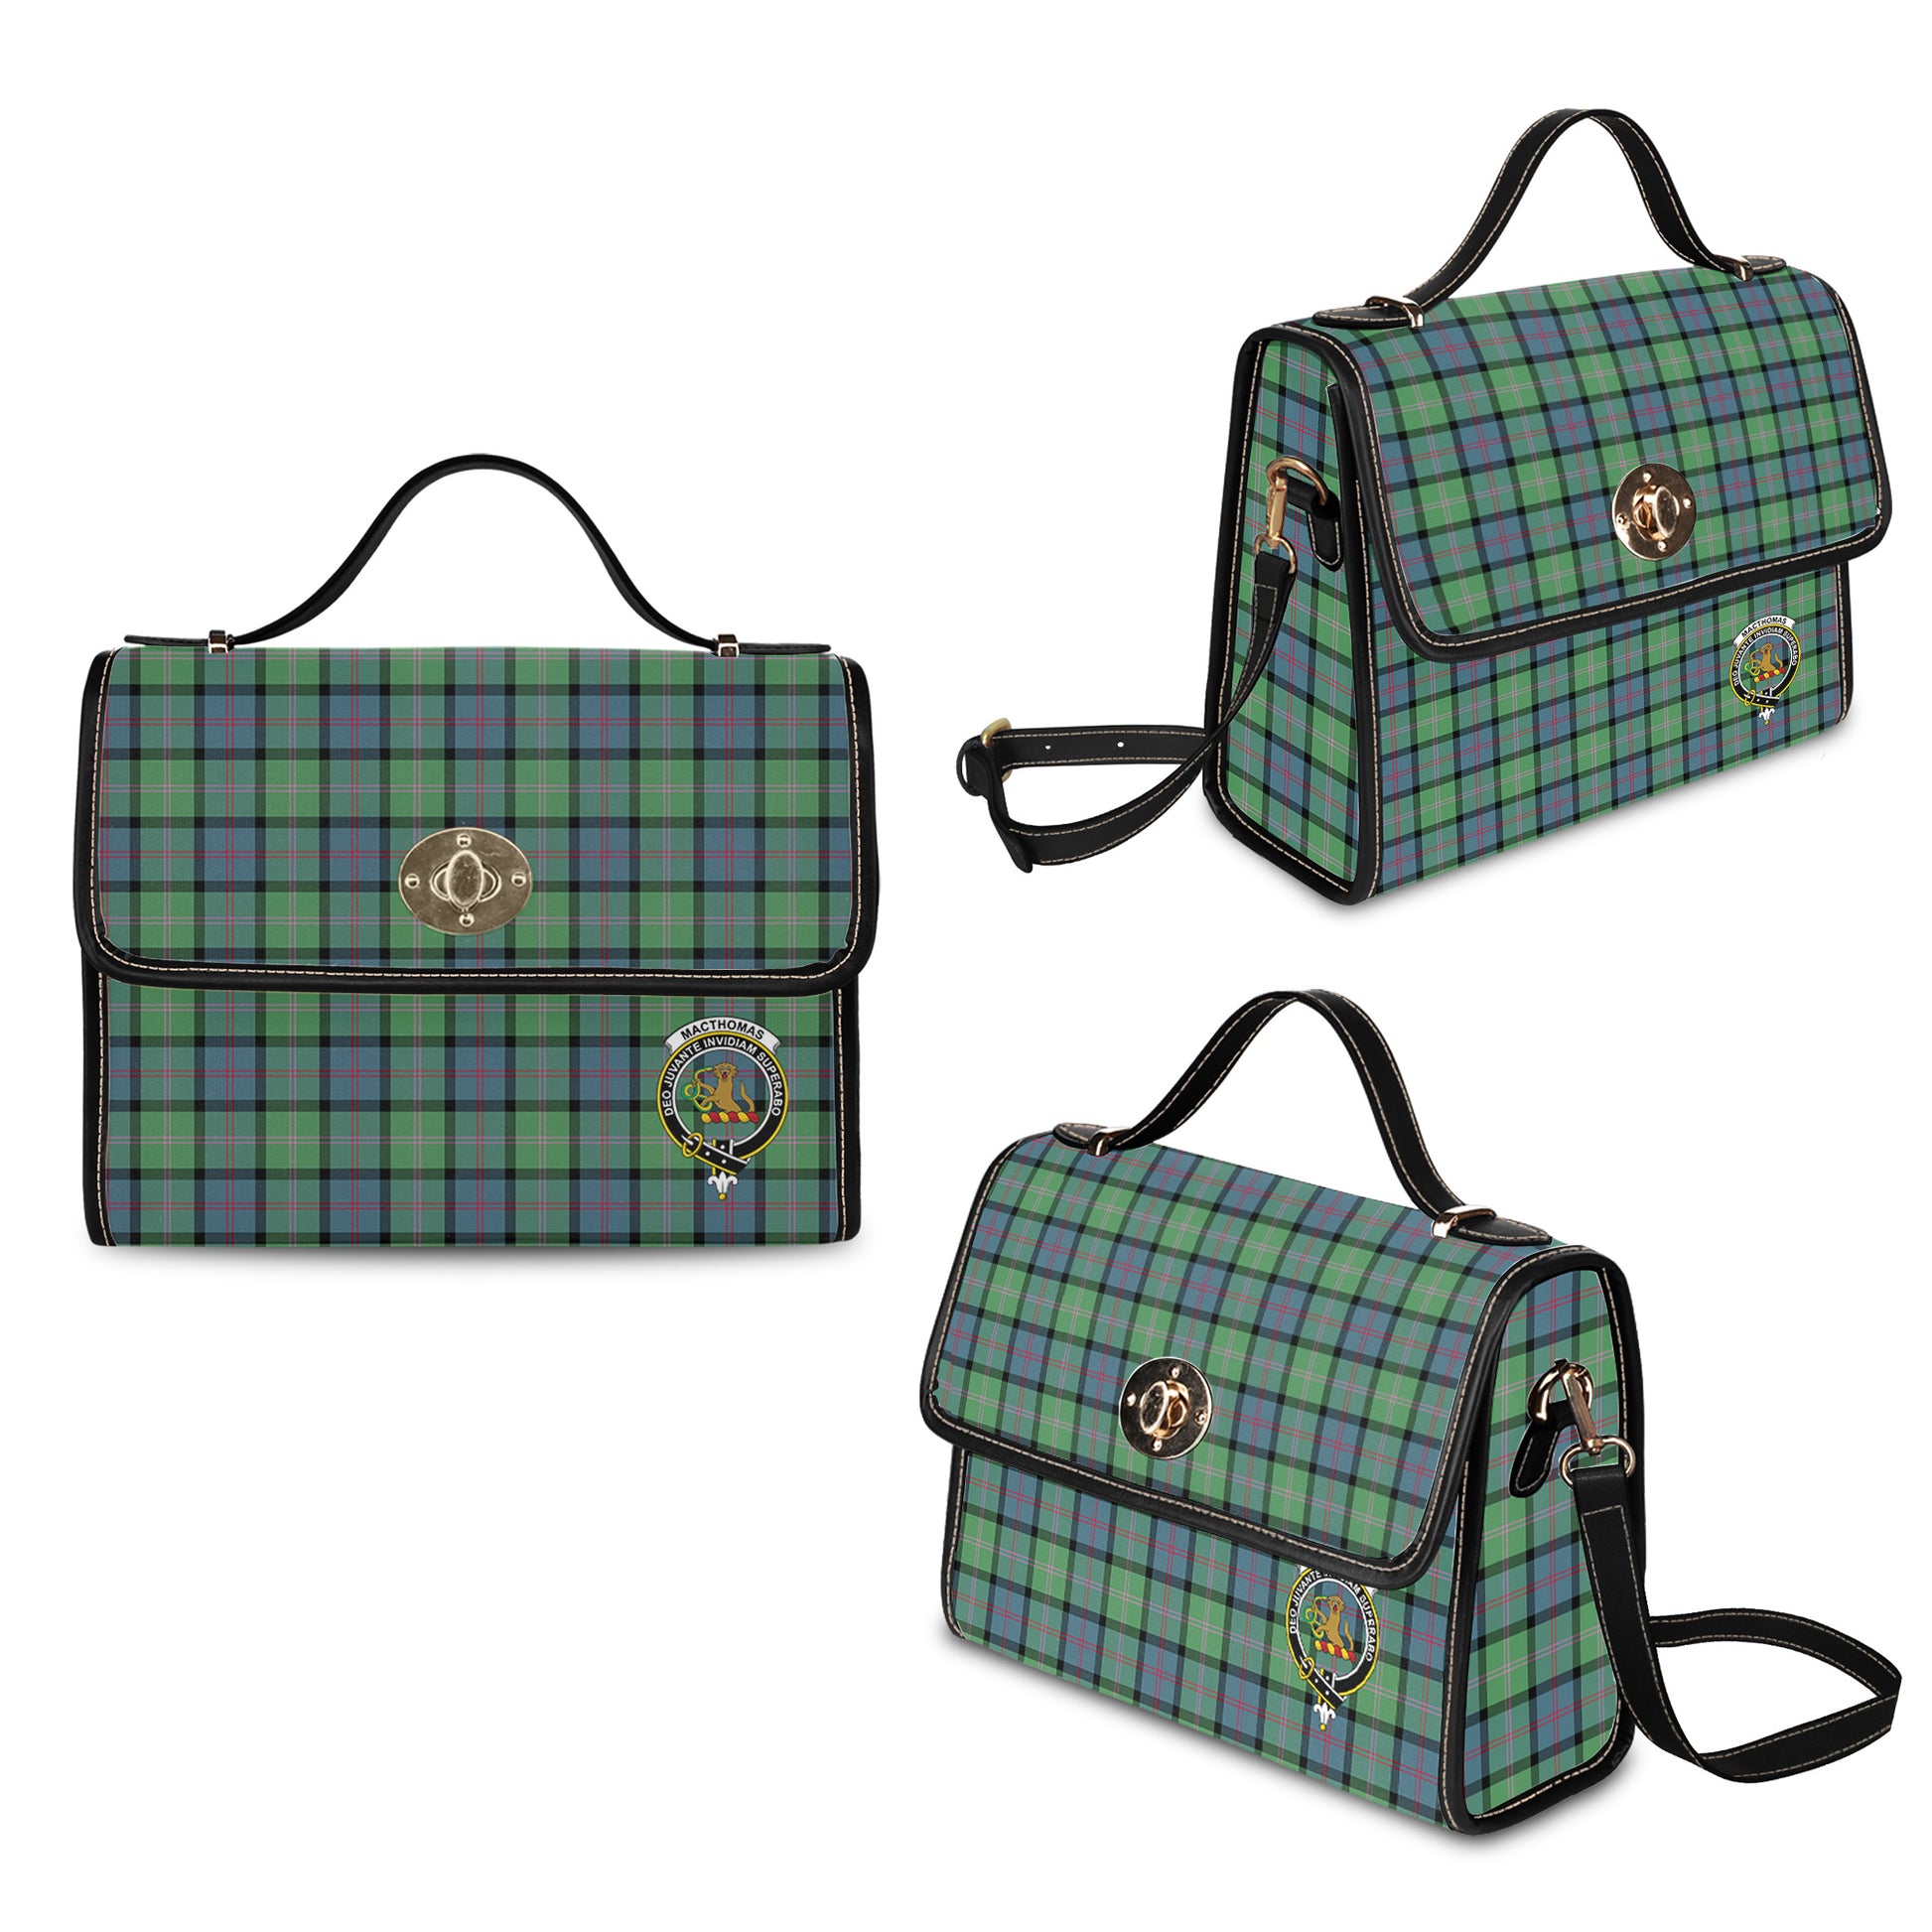 macthomas-ancient-tartan-leather-strap-waterproof-canvas-bag-with-family-crest